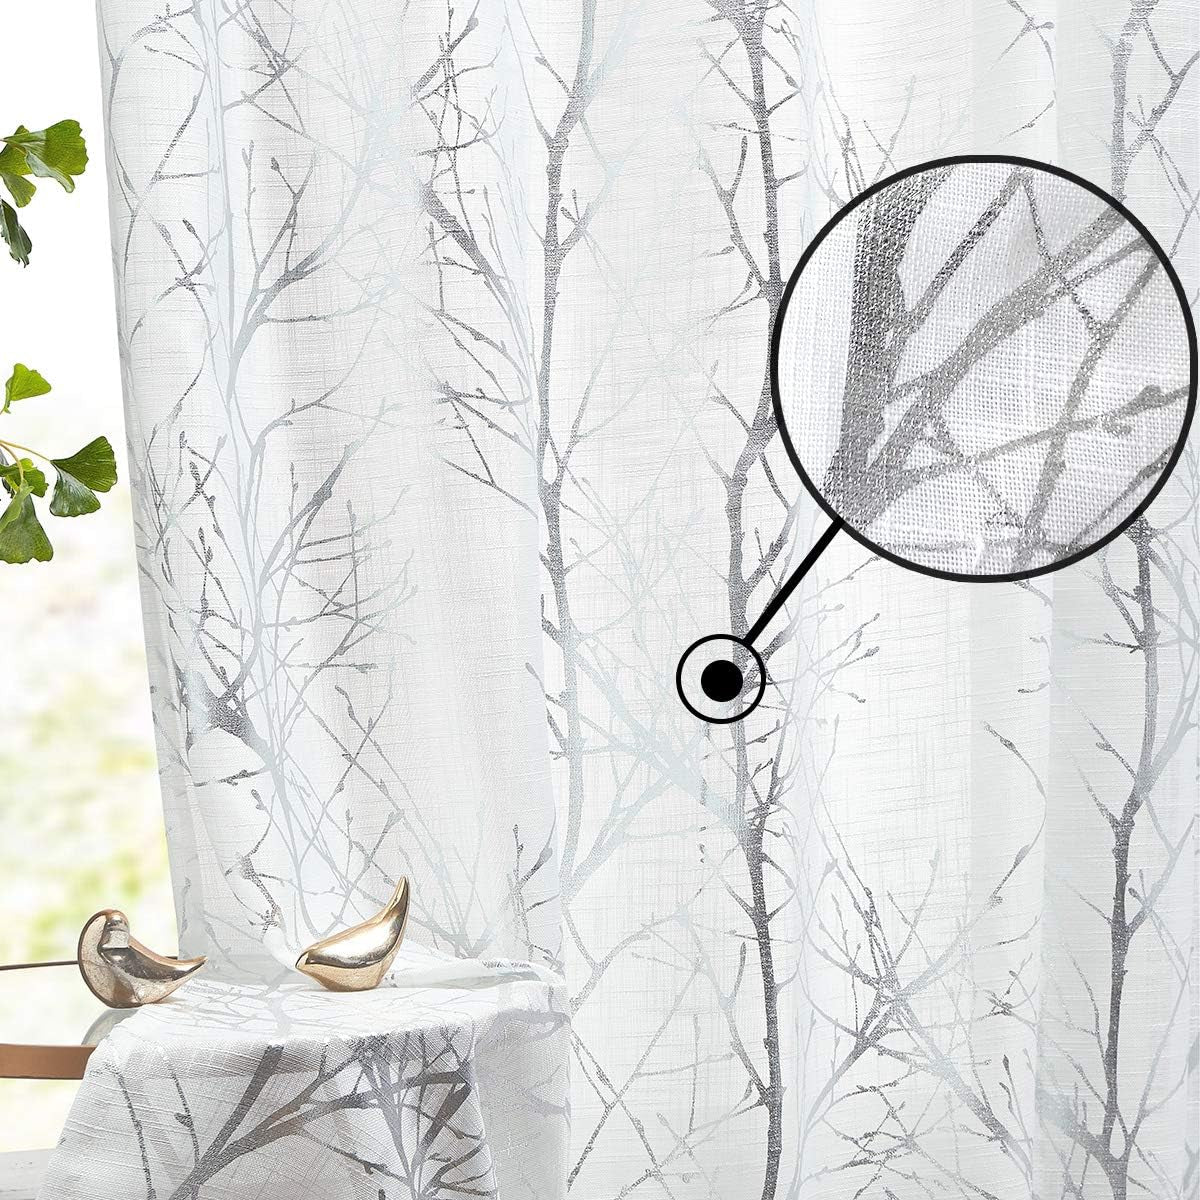 FMFUNCTEX Blue White Curtains for Kitchen Living Room 72“ Grey Tree Branches Print Curtain Set for Small Windows Linen Textured Semi-Sheer Drapes for Bedroom Grommet Top, 2 Panels  Fmfunctex Semi-Sheer: White + Foil Silver 50" X 63" |2Pcs 